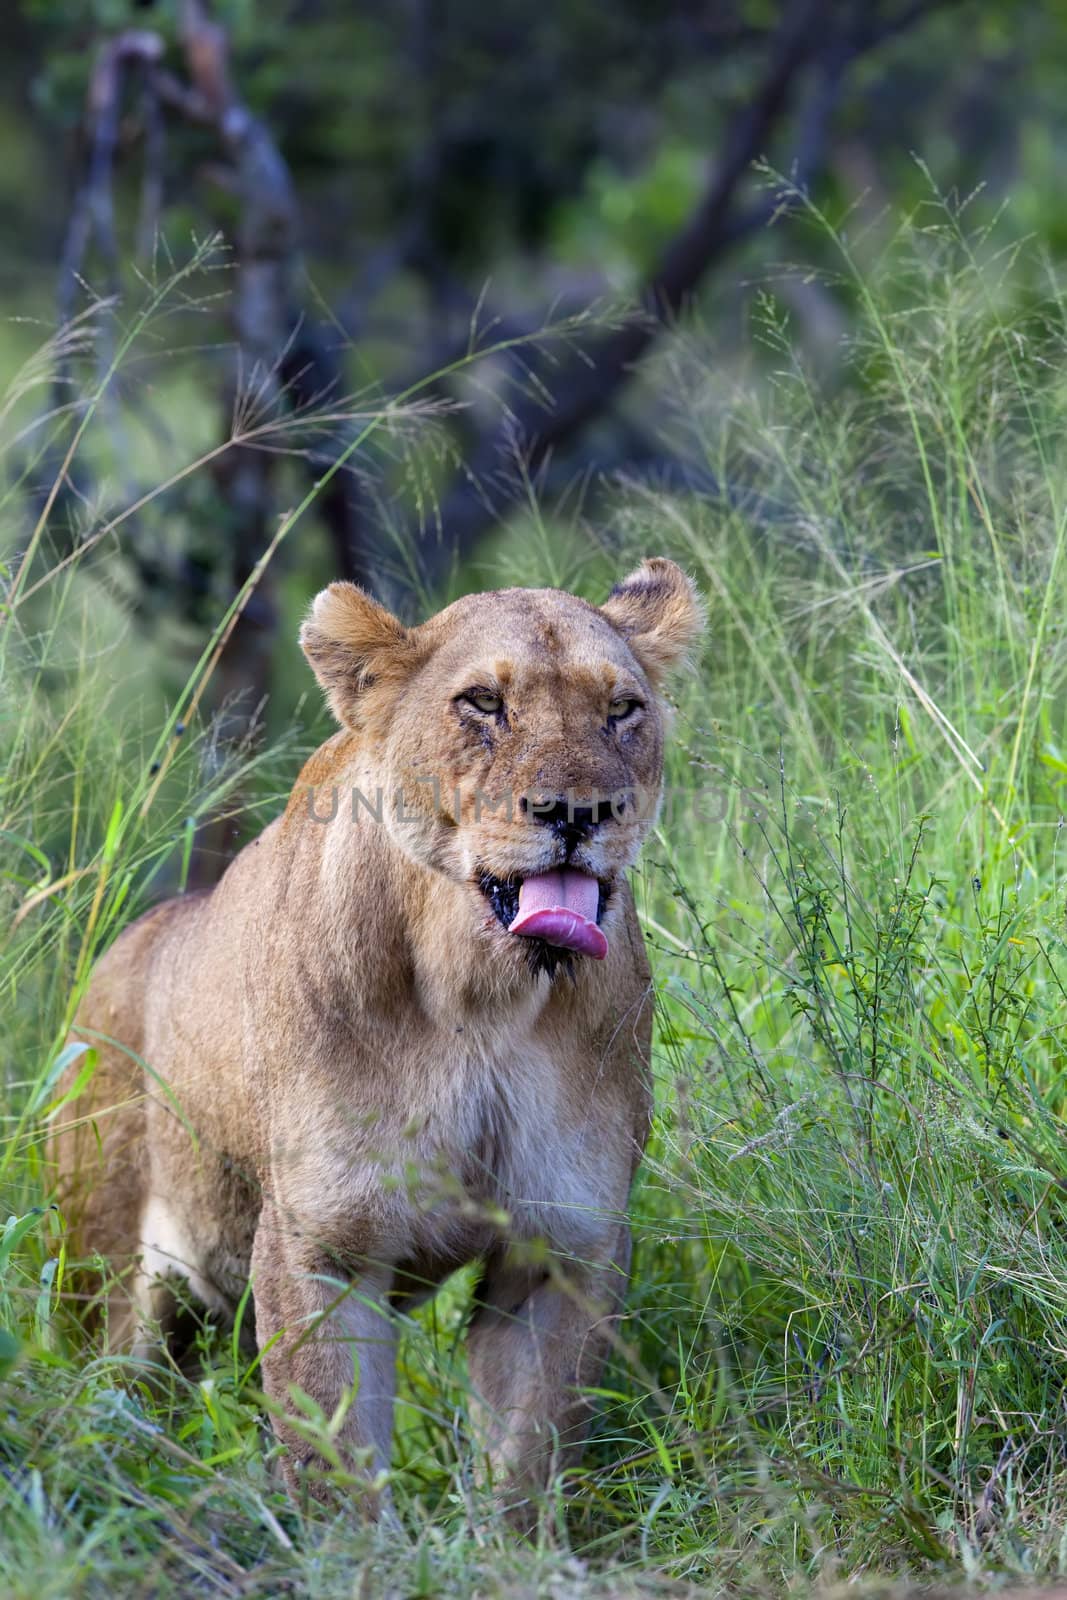 Lioness standing in the grass yawning